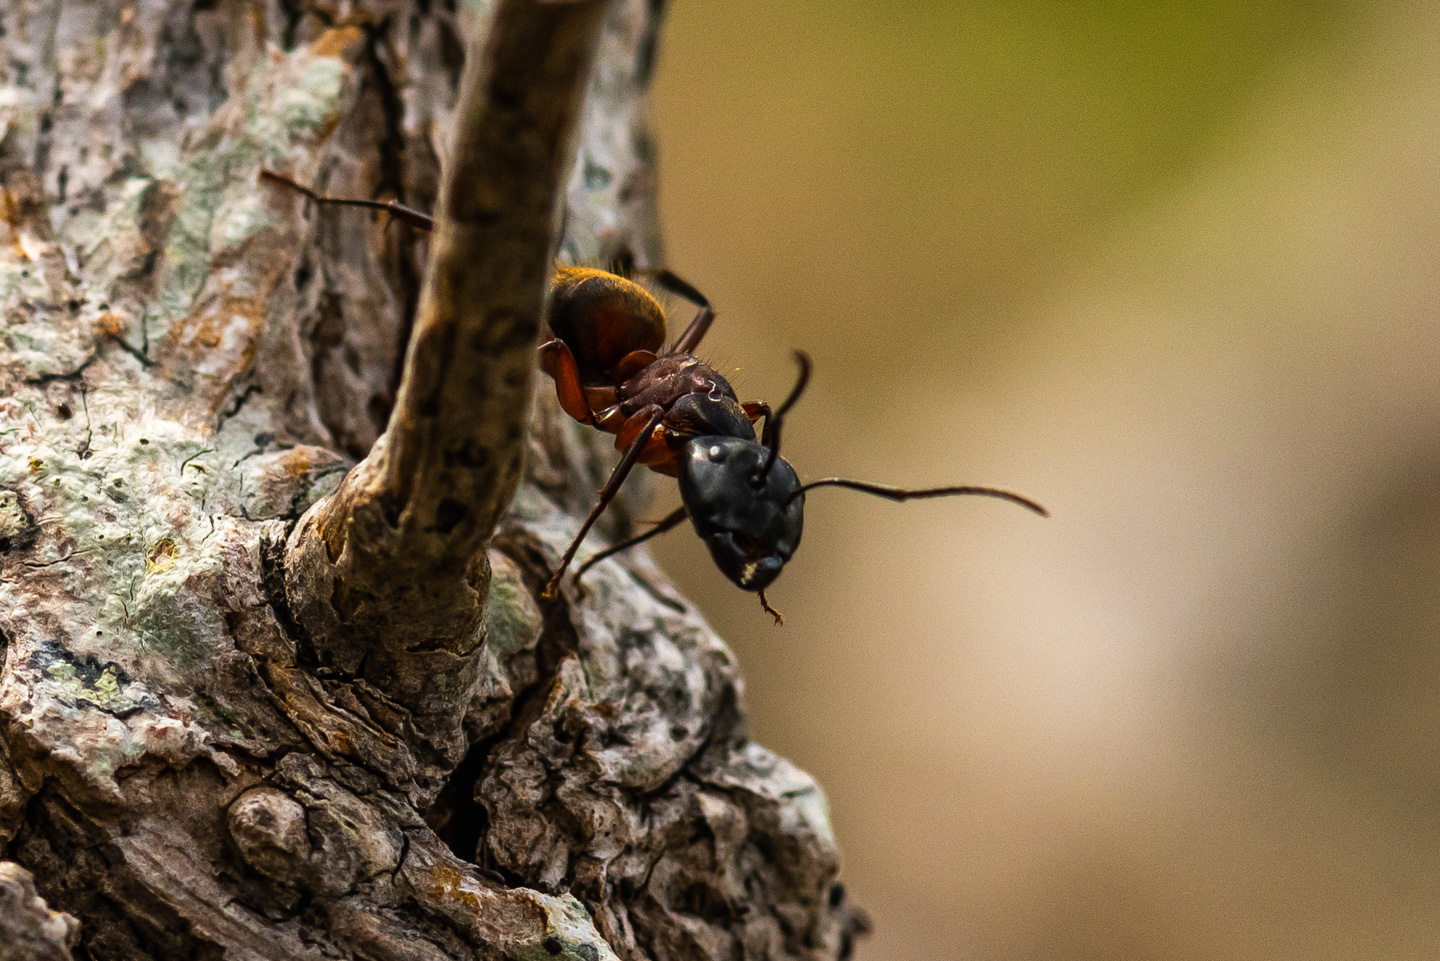 Black and Red Carpenter Ant